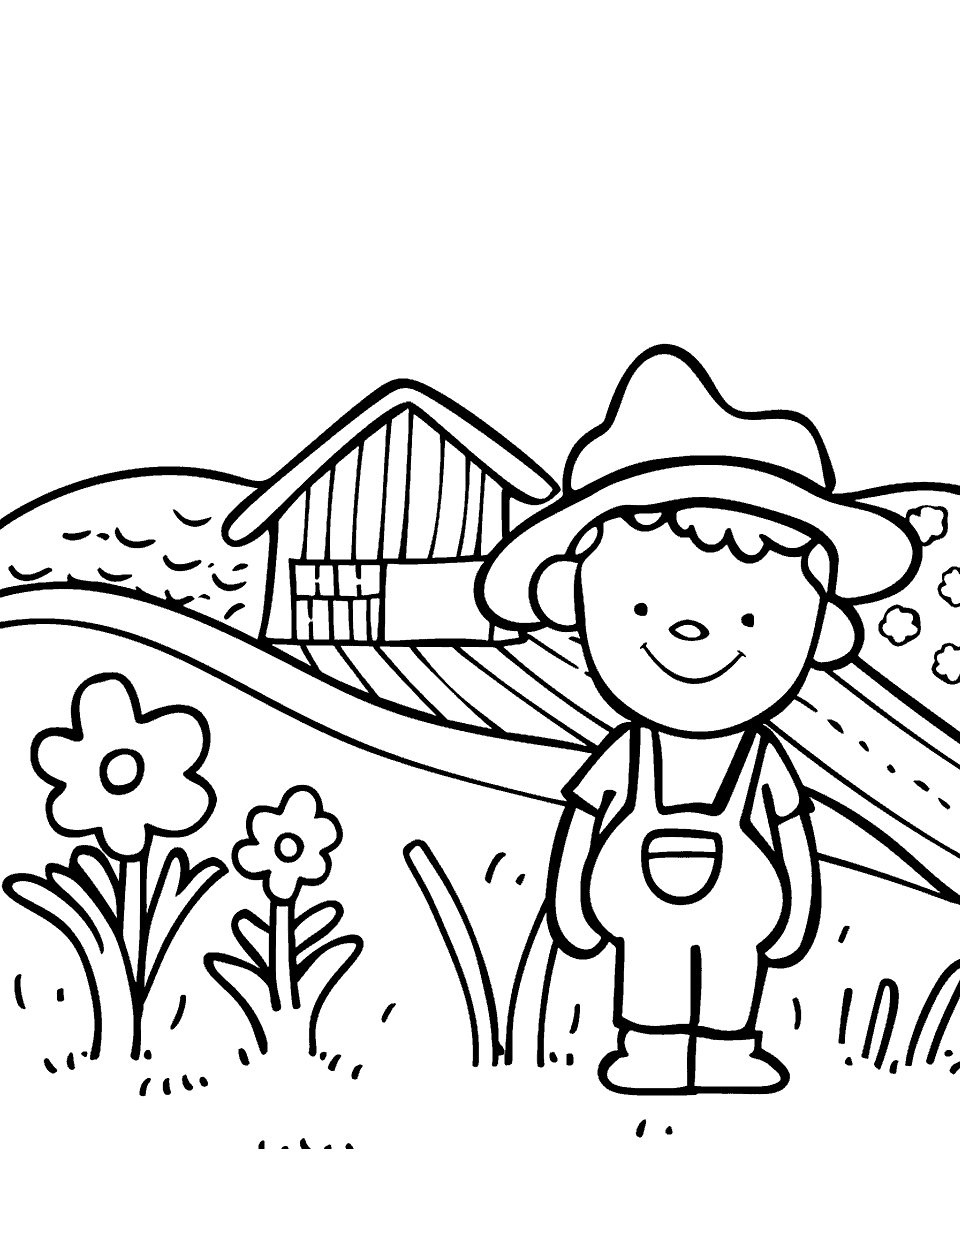 Happy Farm Coloring Page - A smiling farmer in front of the farm.